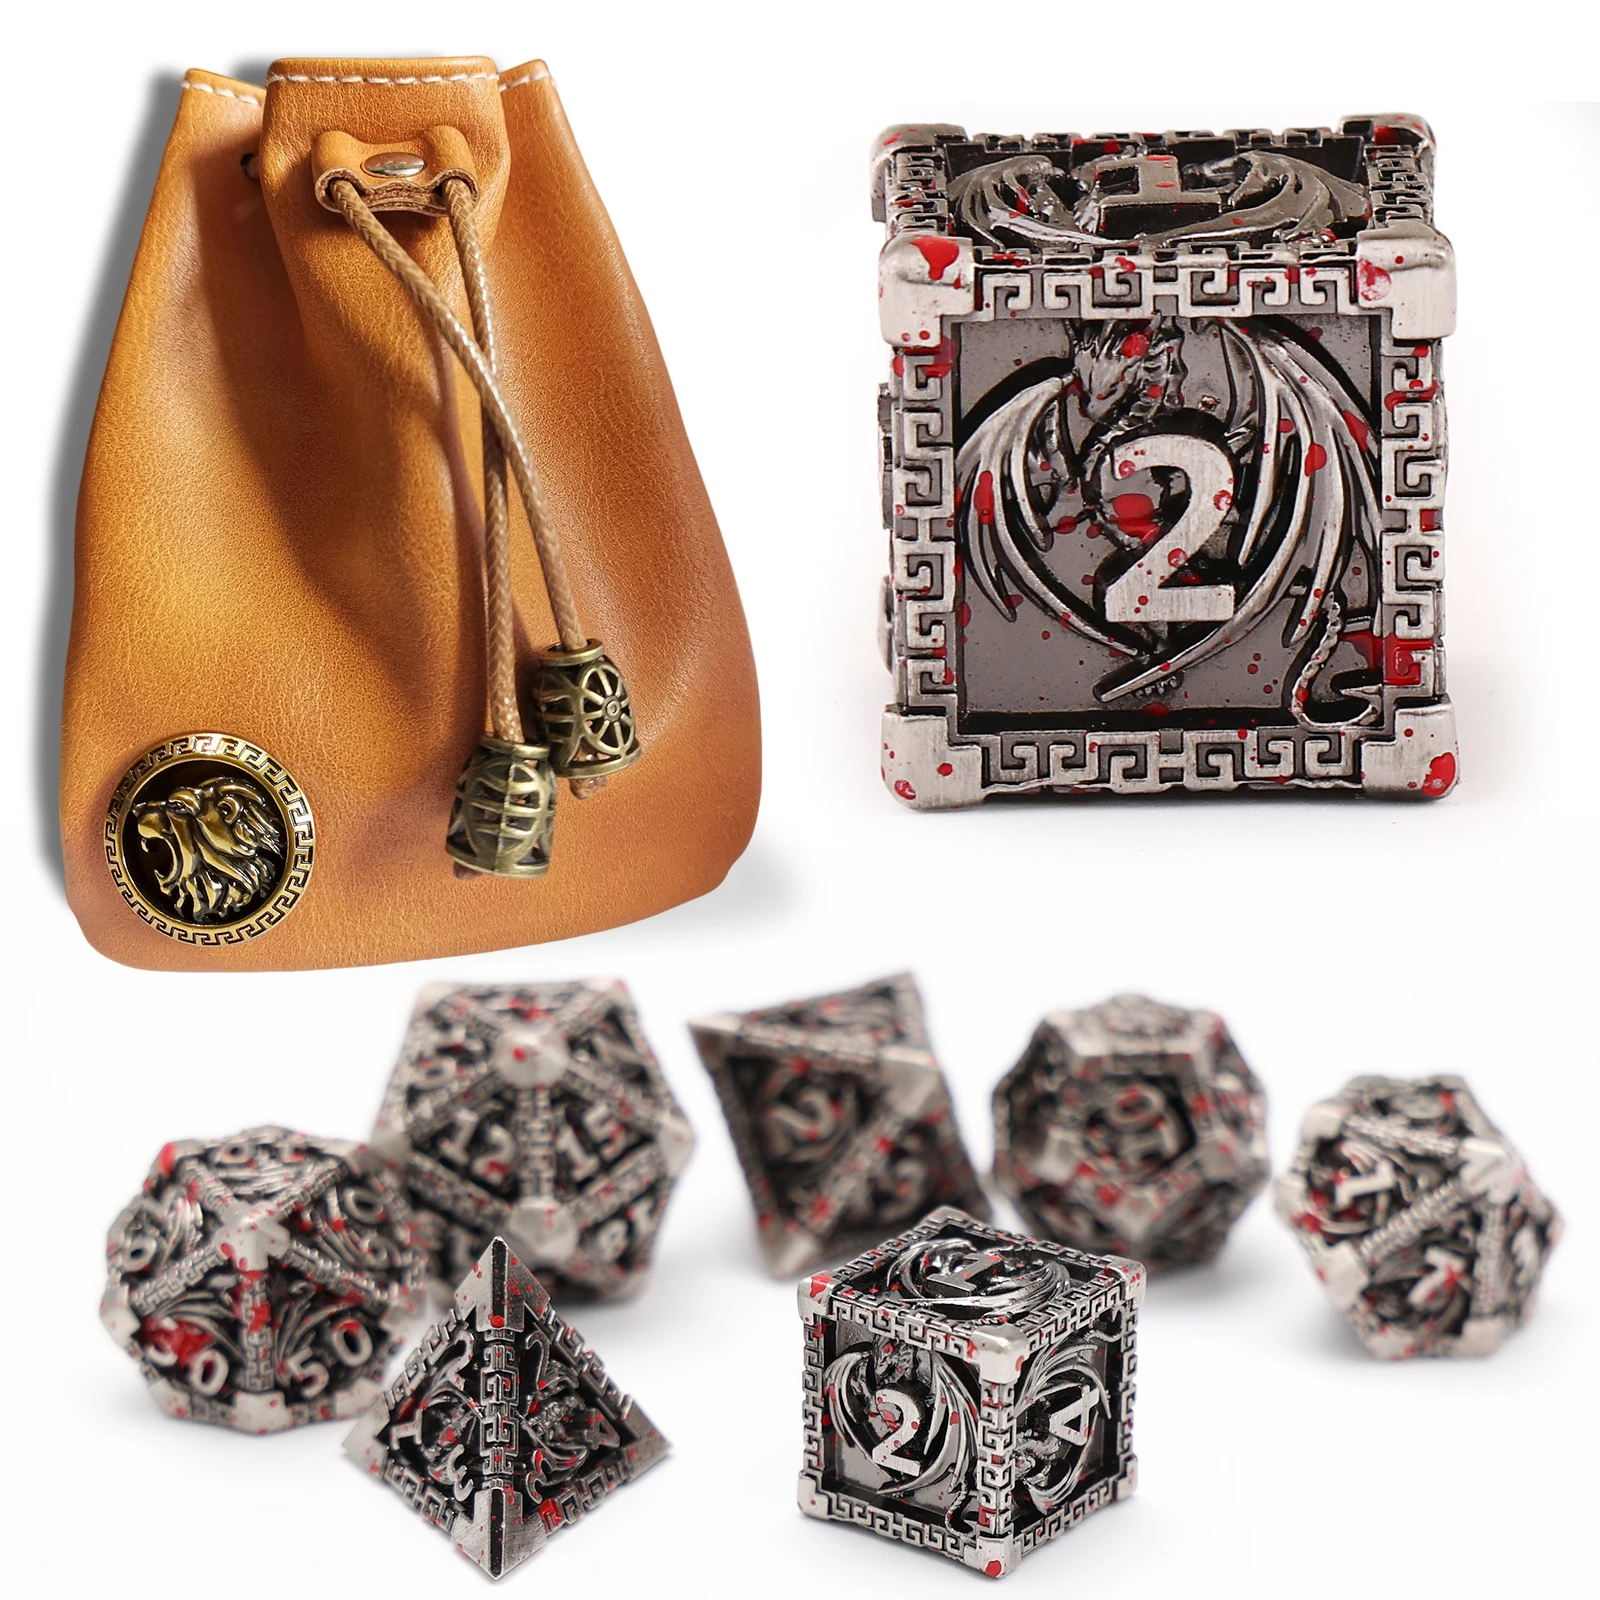 

7Pcs/Set Metal Polyhedral Dice Set Hot Party Table Games Dices Accessory For Dungeons And Dragons D&d DND D6 D8 D10 D12 D20